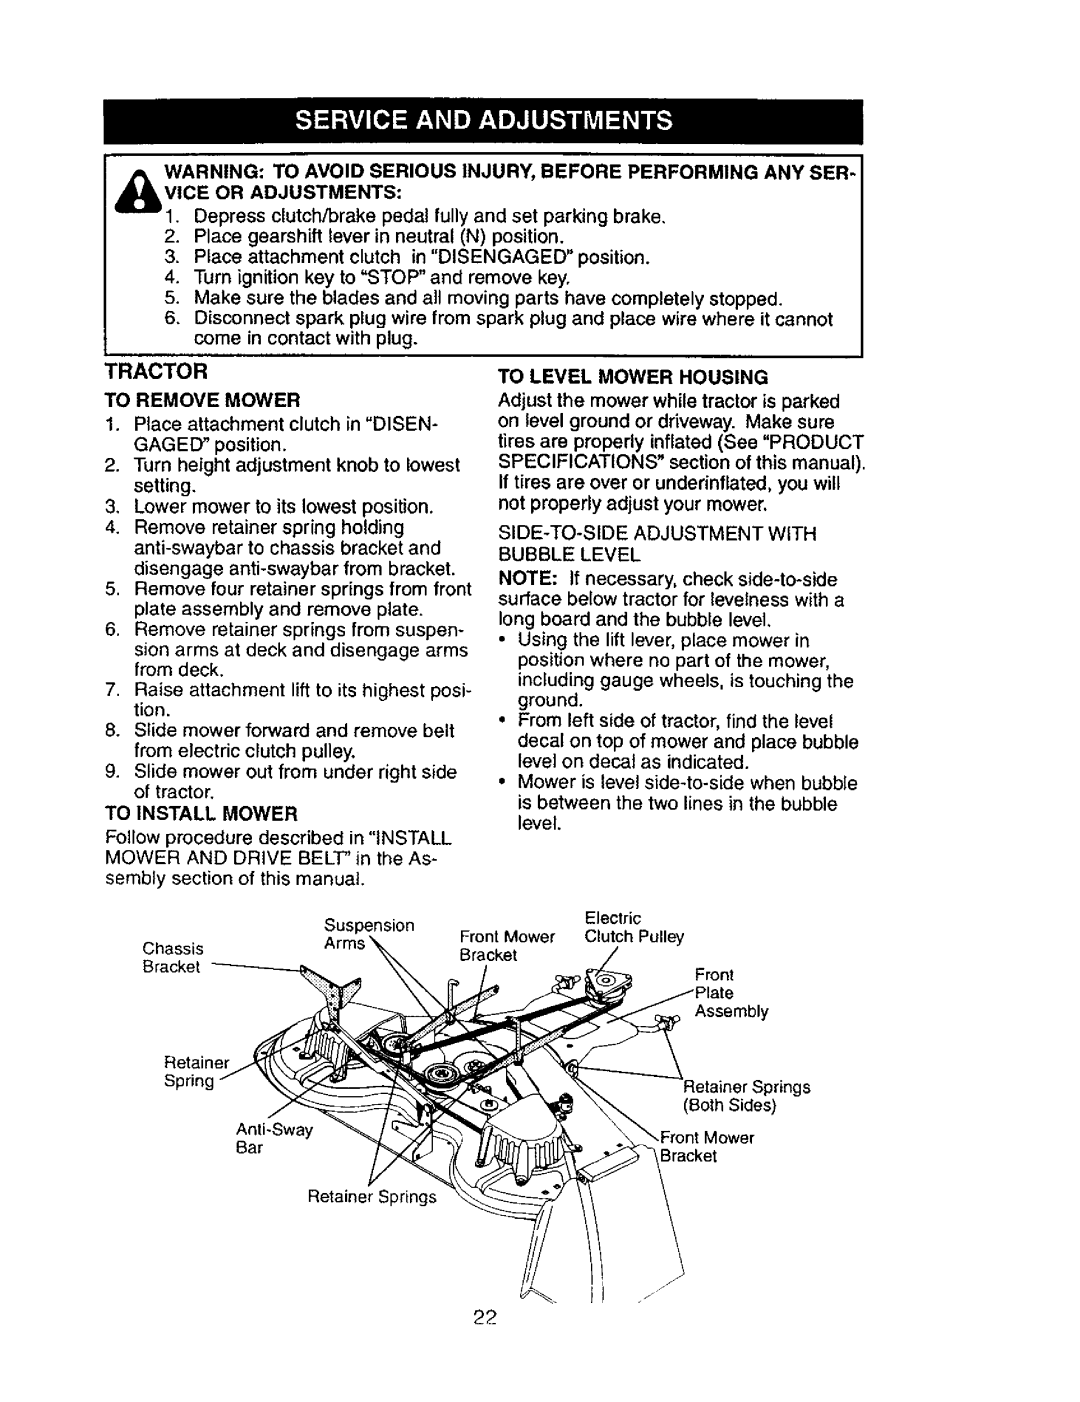 Craftsman 917.27603 manual Tractor, Vice Or Adjustments, To Remove Mower, To Level Mower Housing, Both Sides 